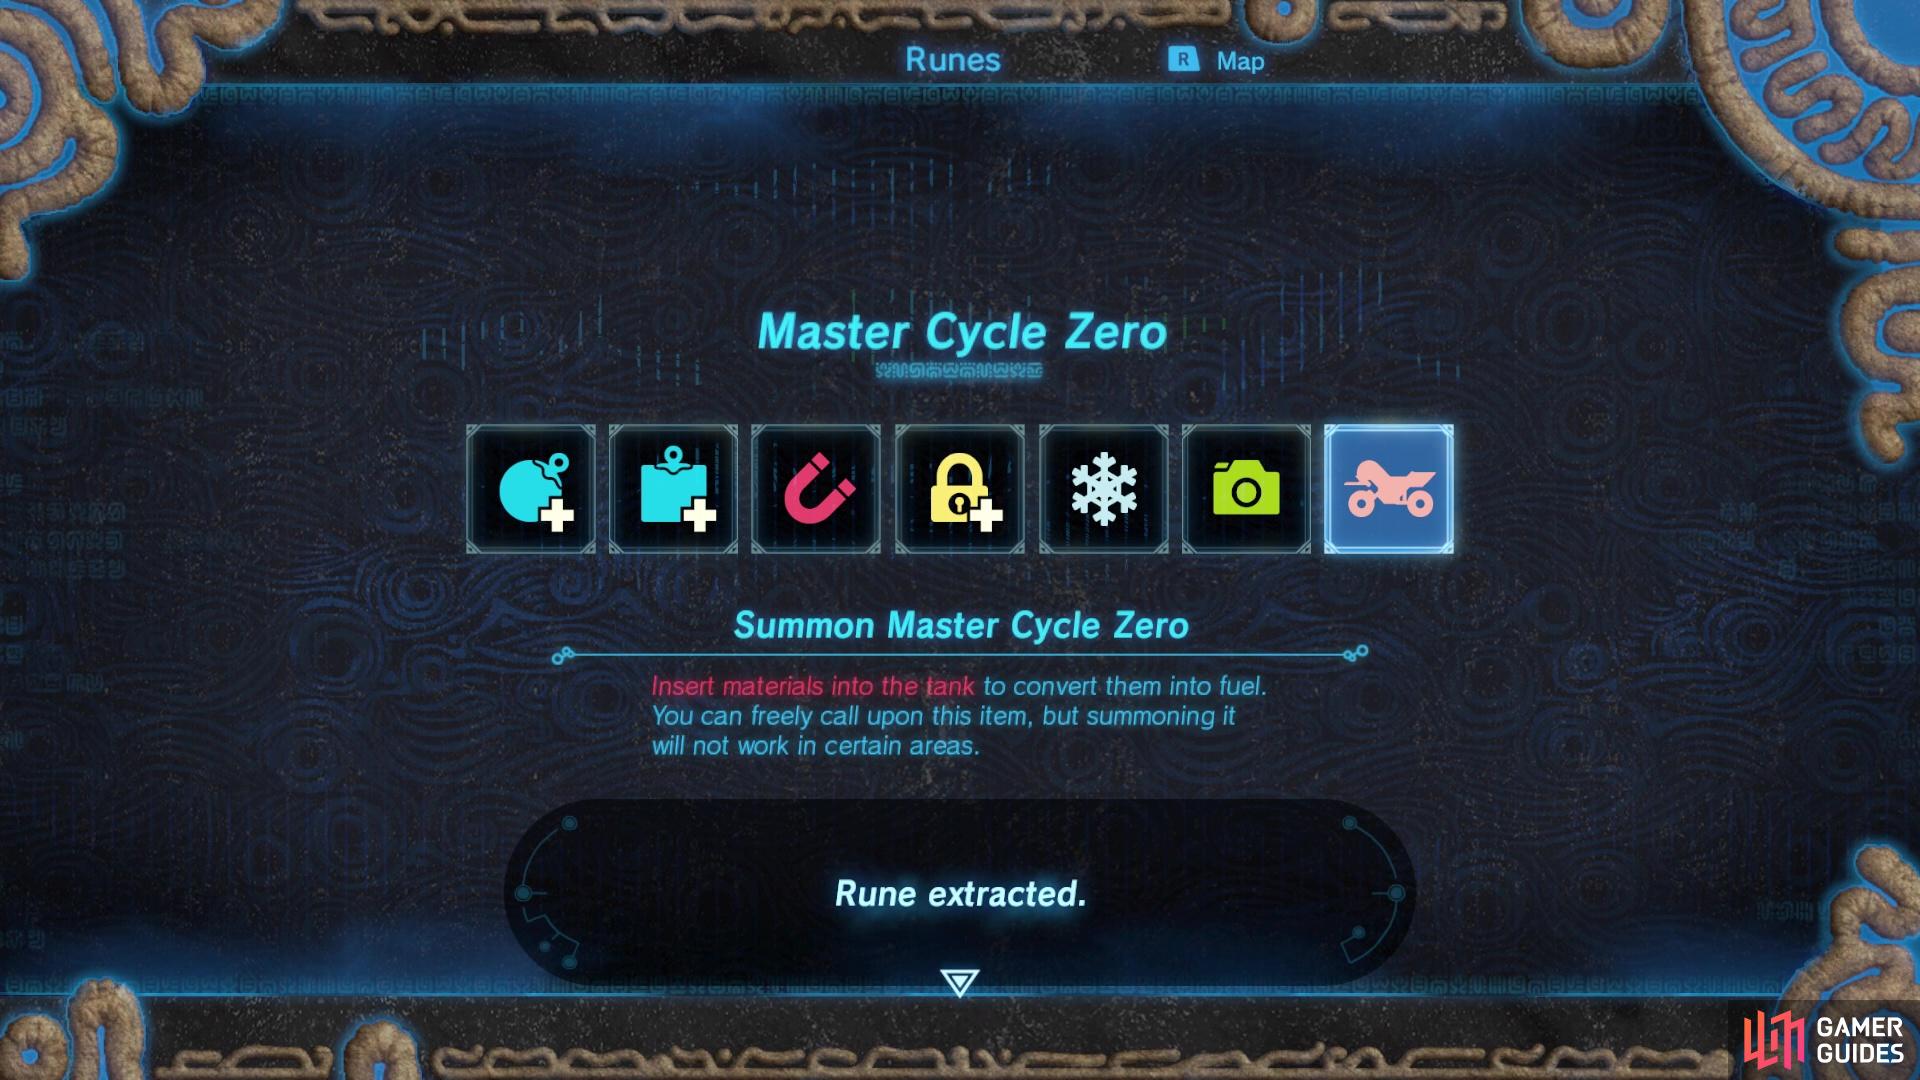 The Master Cycle Zero is a rune found on your Sheikah Slate.